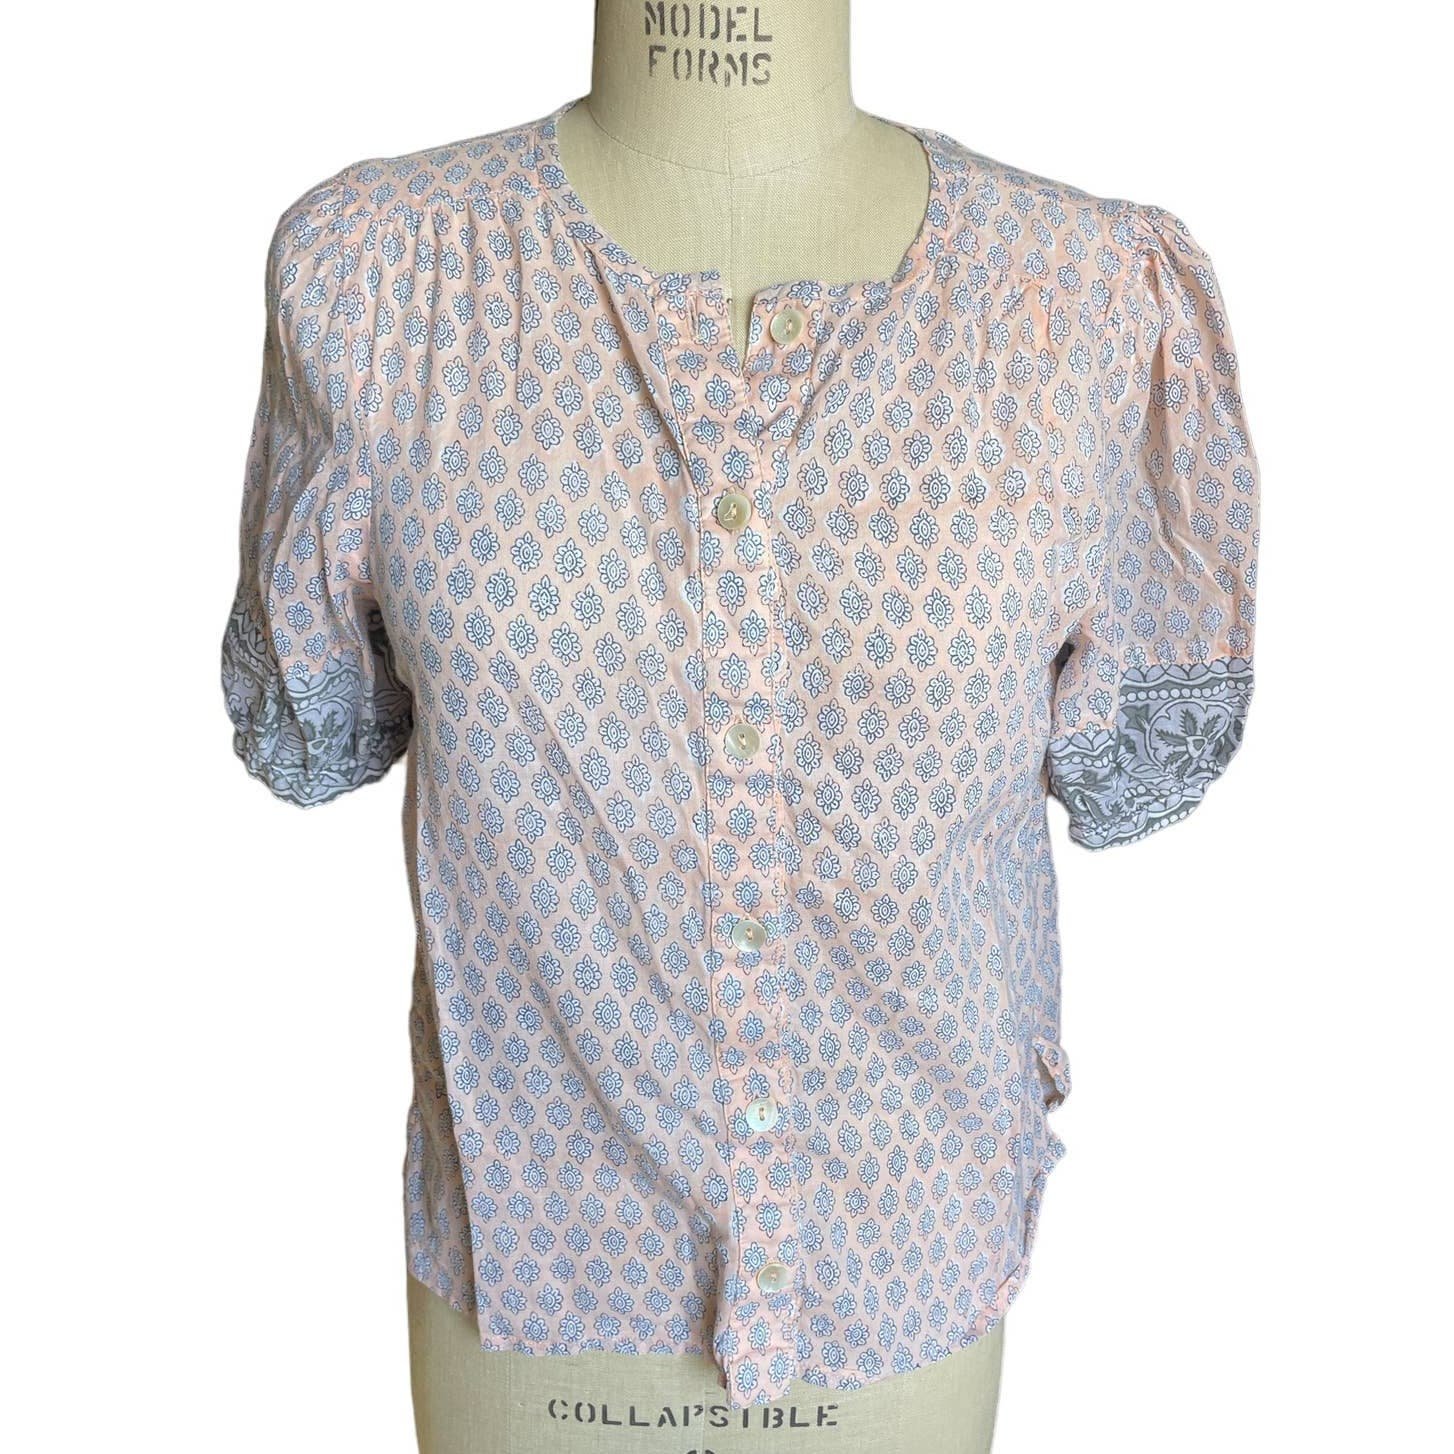 Comfortable Cleobella Pink & Gray Short Sleeved Cotton Button Front Top - Small p2zY5GnRa just buy it